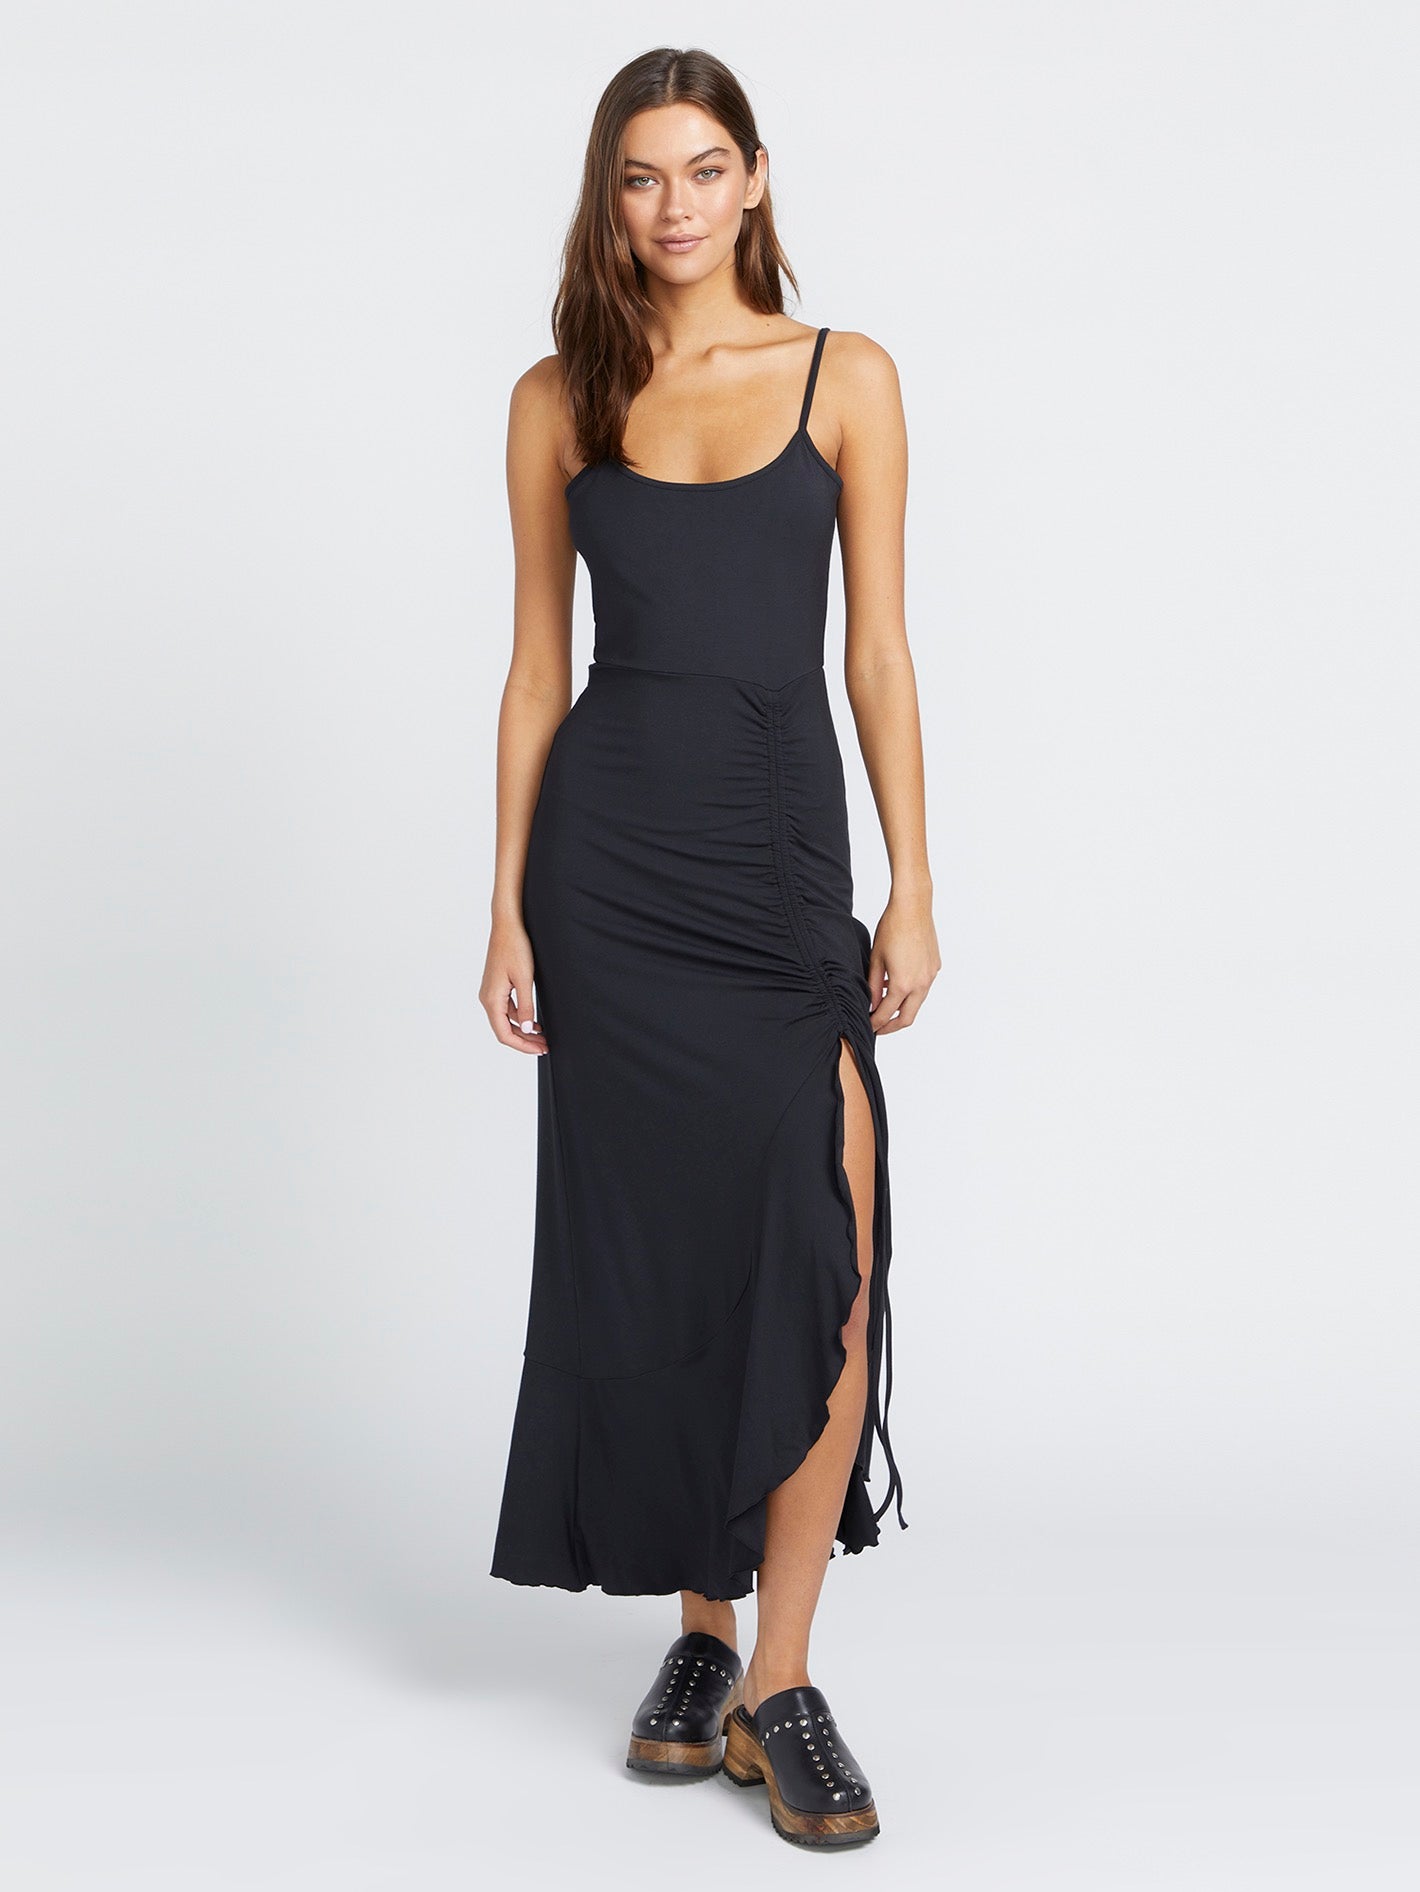 Black Slip Dress with Side Split by Flash you and me